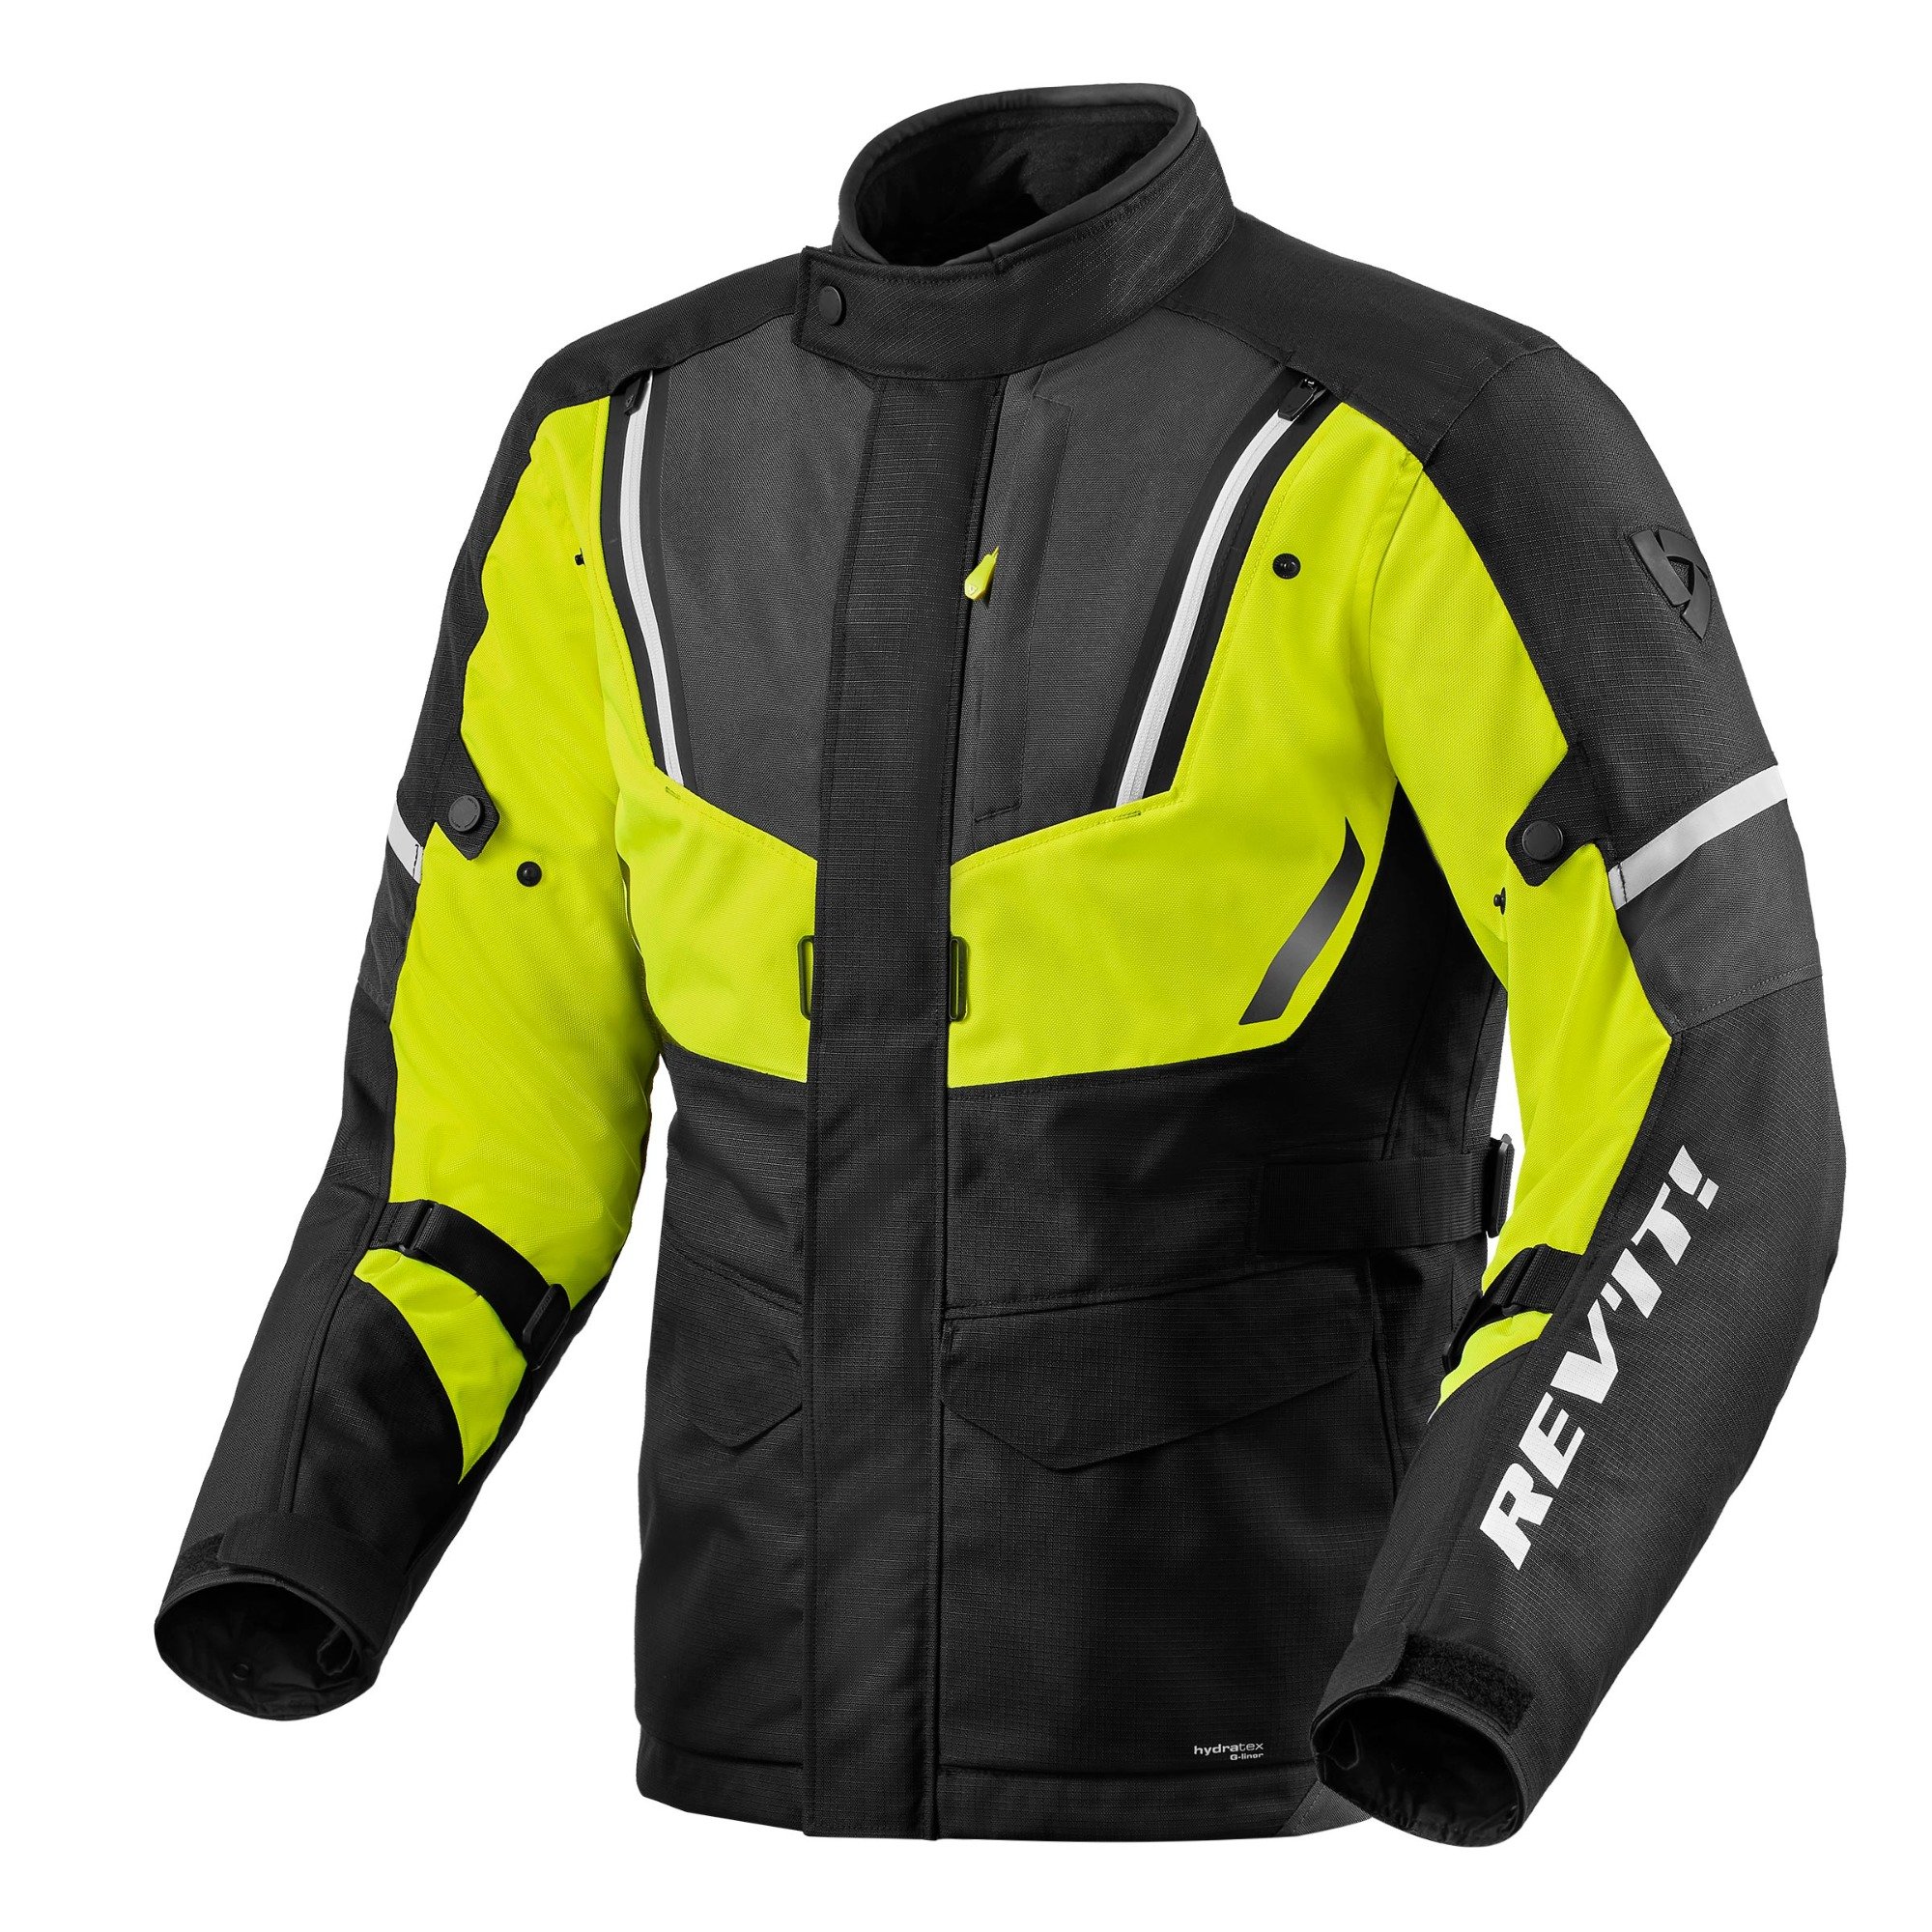 Image of REV'IT! Move H2O Jacket Black Neon Yellow Size S ID 8700001333047